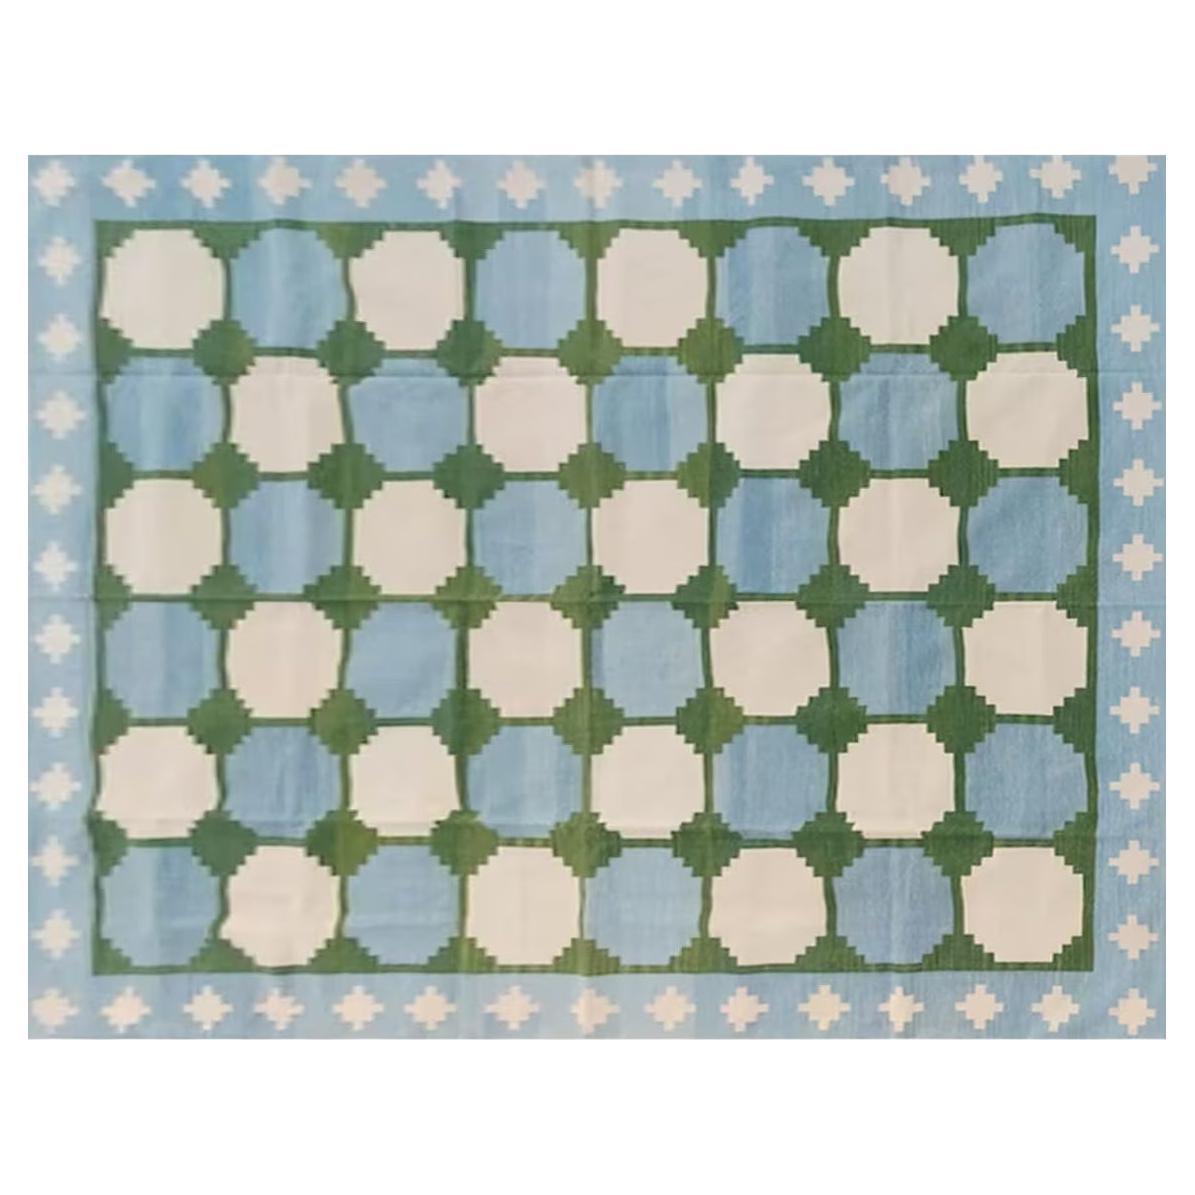 Handmade Cotton Area Flat Weave Rug, Green & Blue Tile Patterned Indian Dhurrie